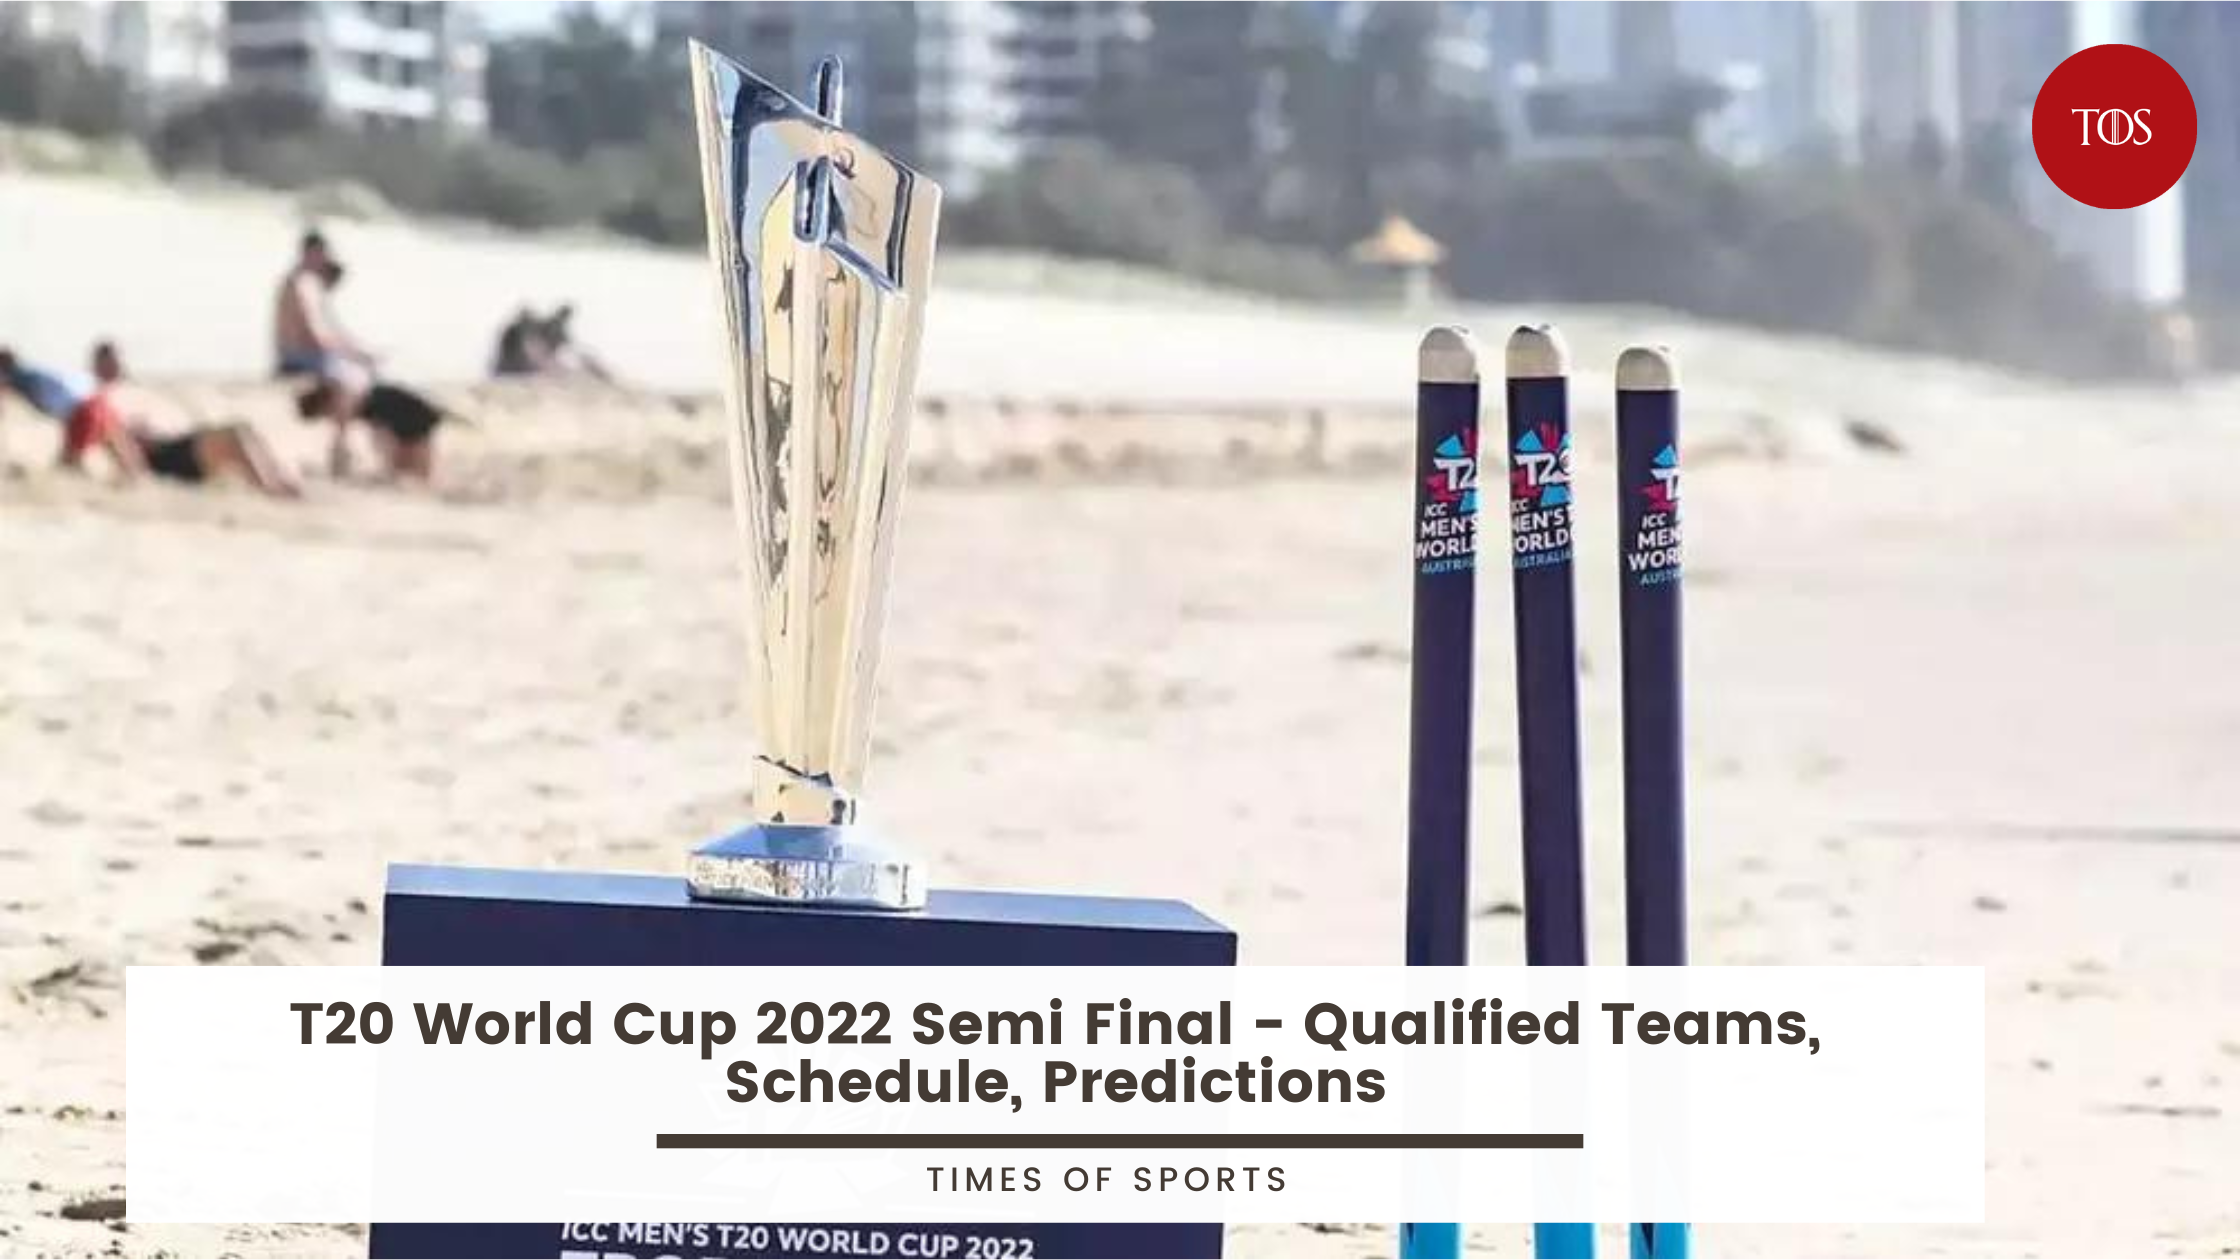 T20 World Cup 2022 Semi Final Qualified Teams, Schedule, Predictions